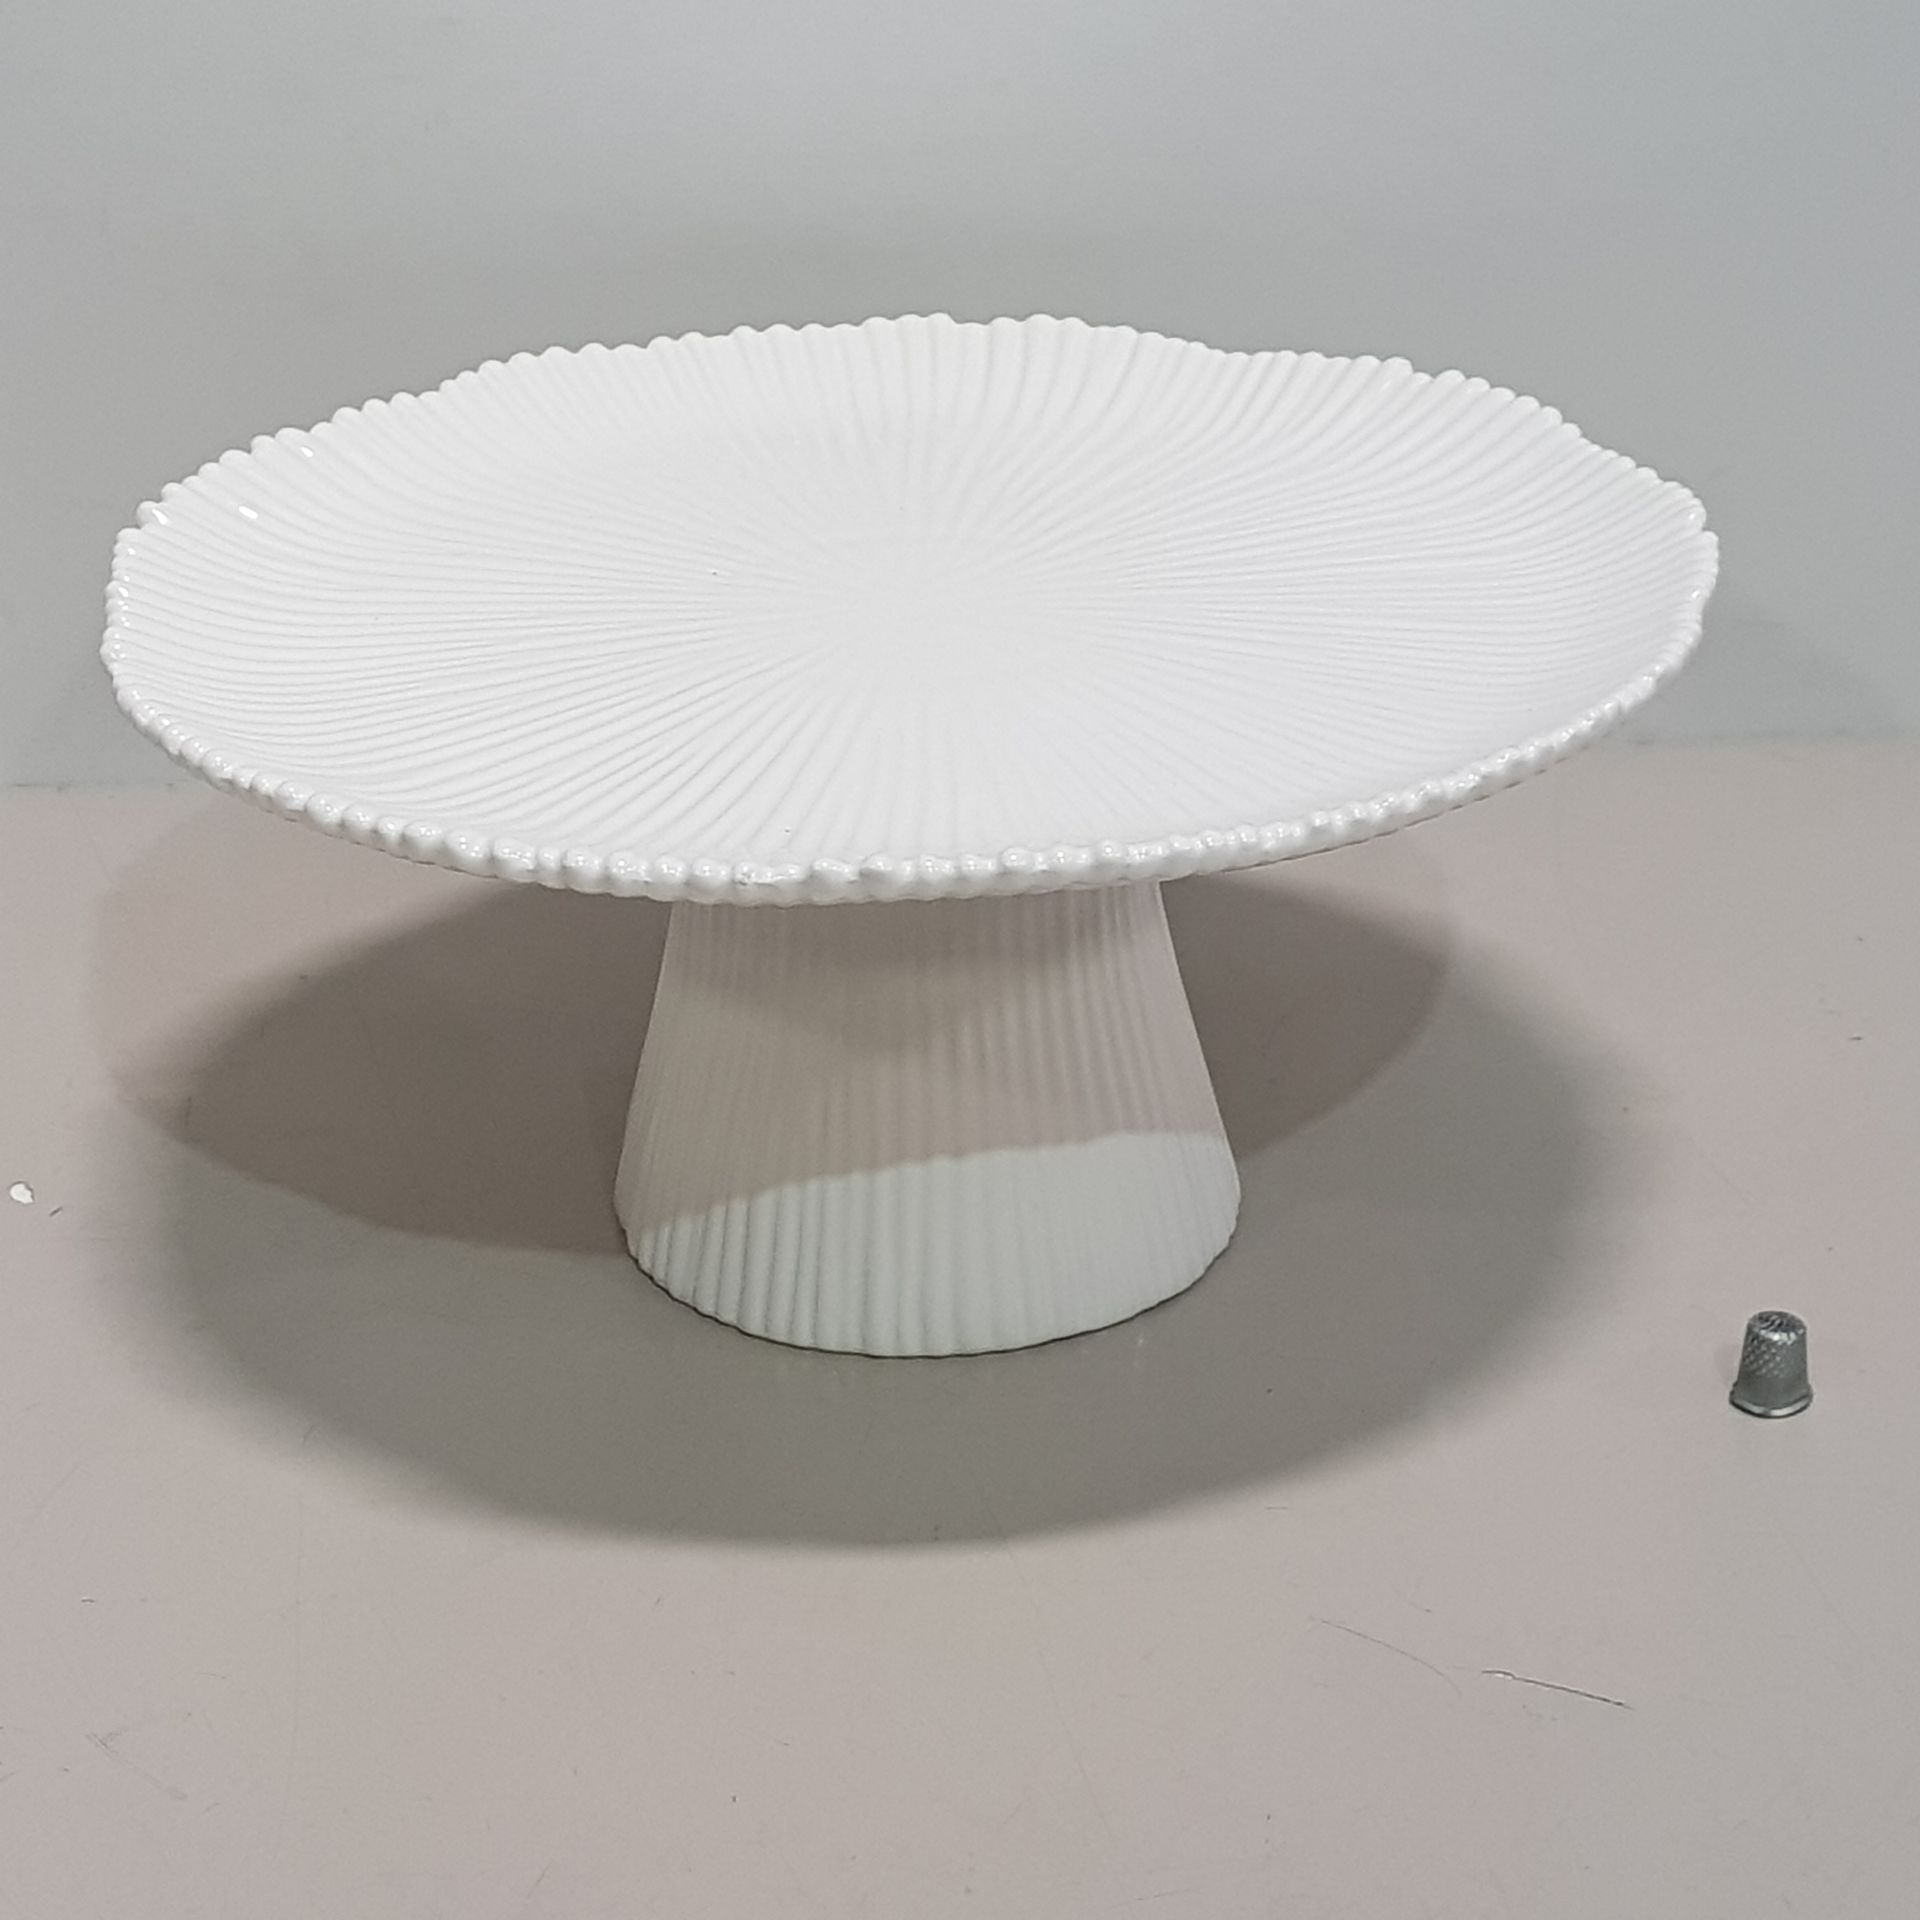 24 X BRAND NEW THE VINTAGE GARDEN ROOM WHITE CERAMIC CAKE STANDS IN 12 BOXES SIZE - 35CM X 16CM